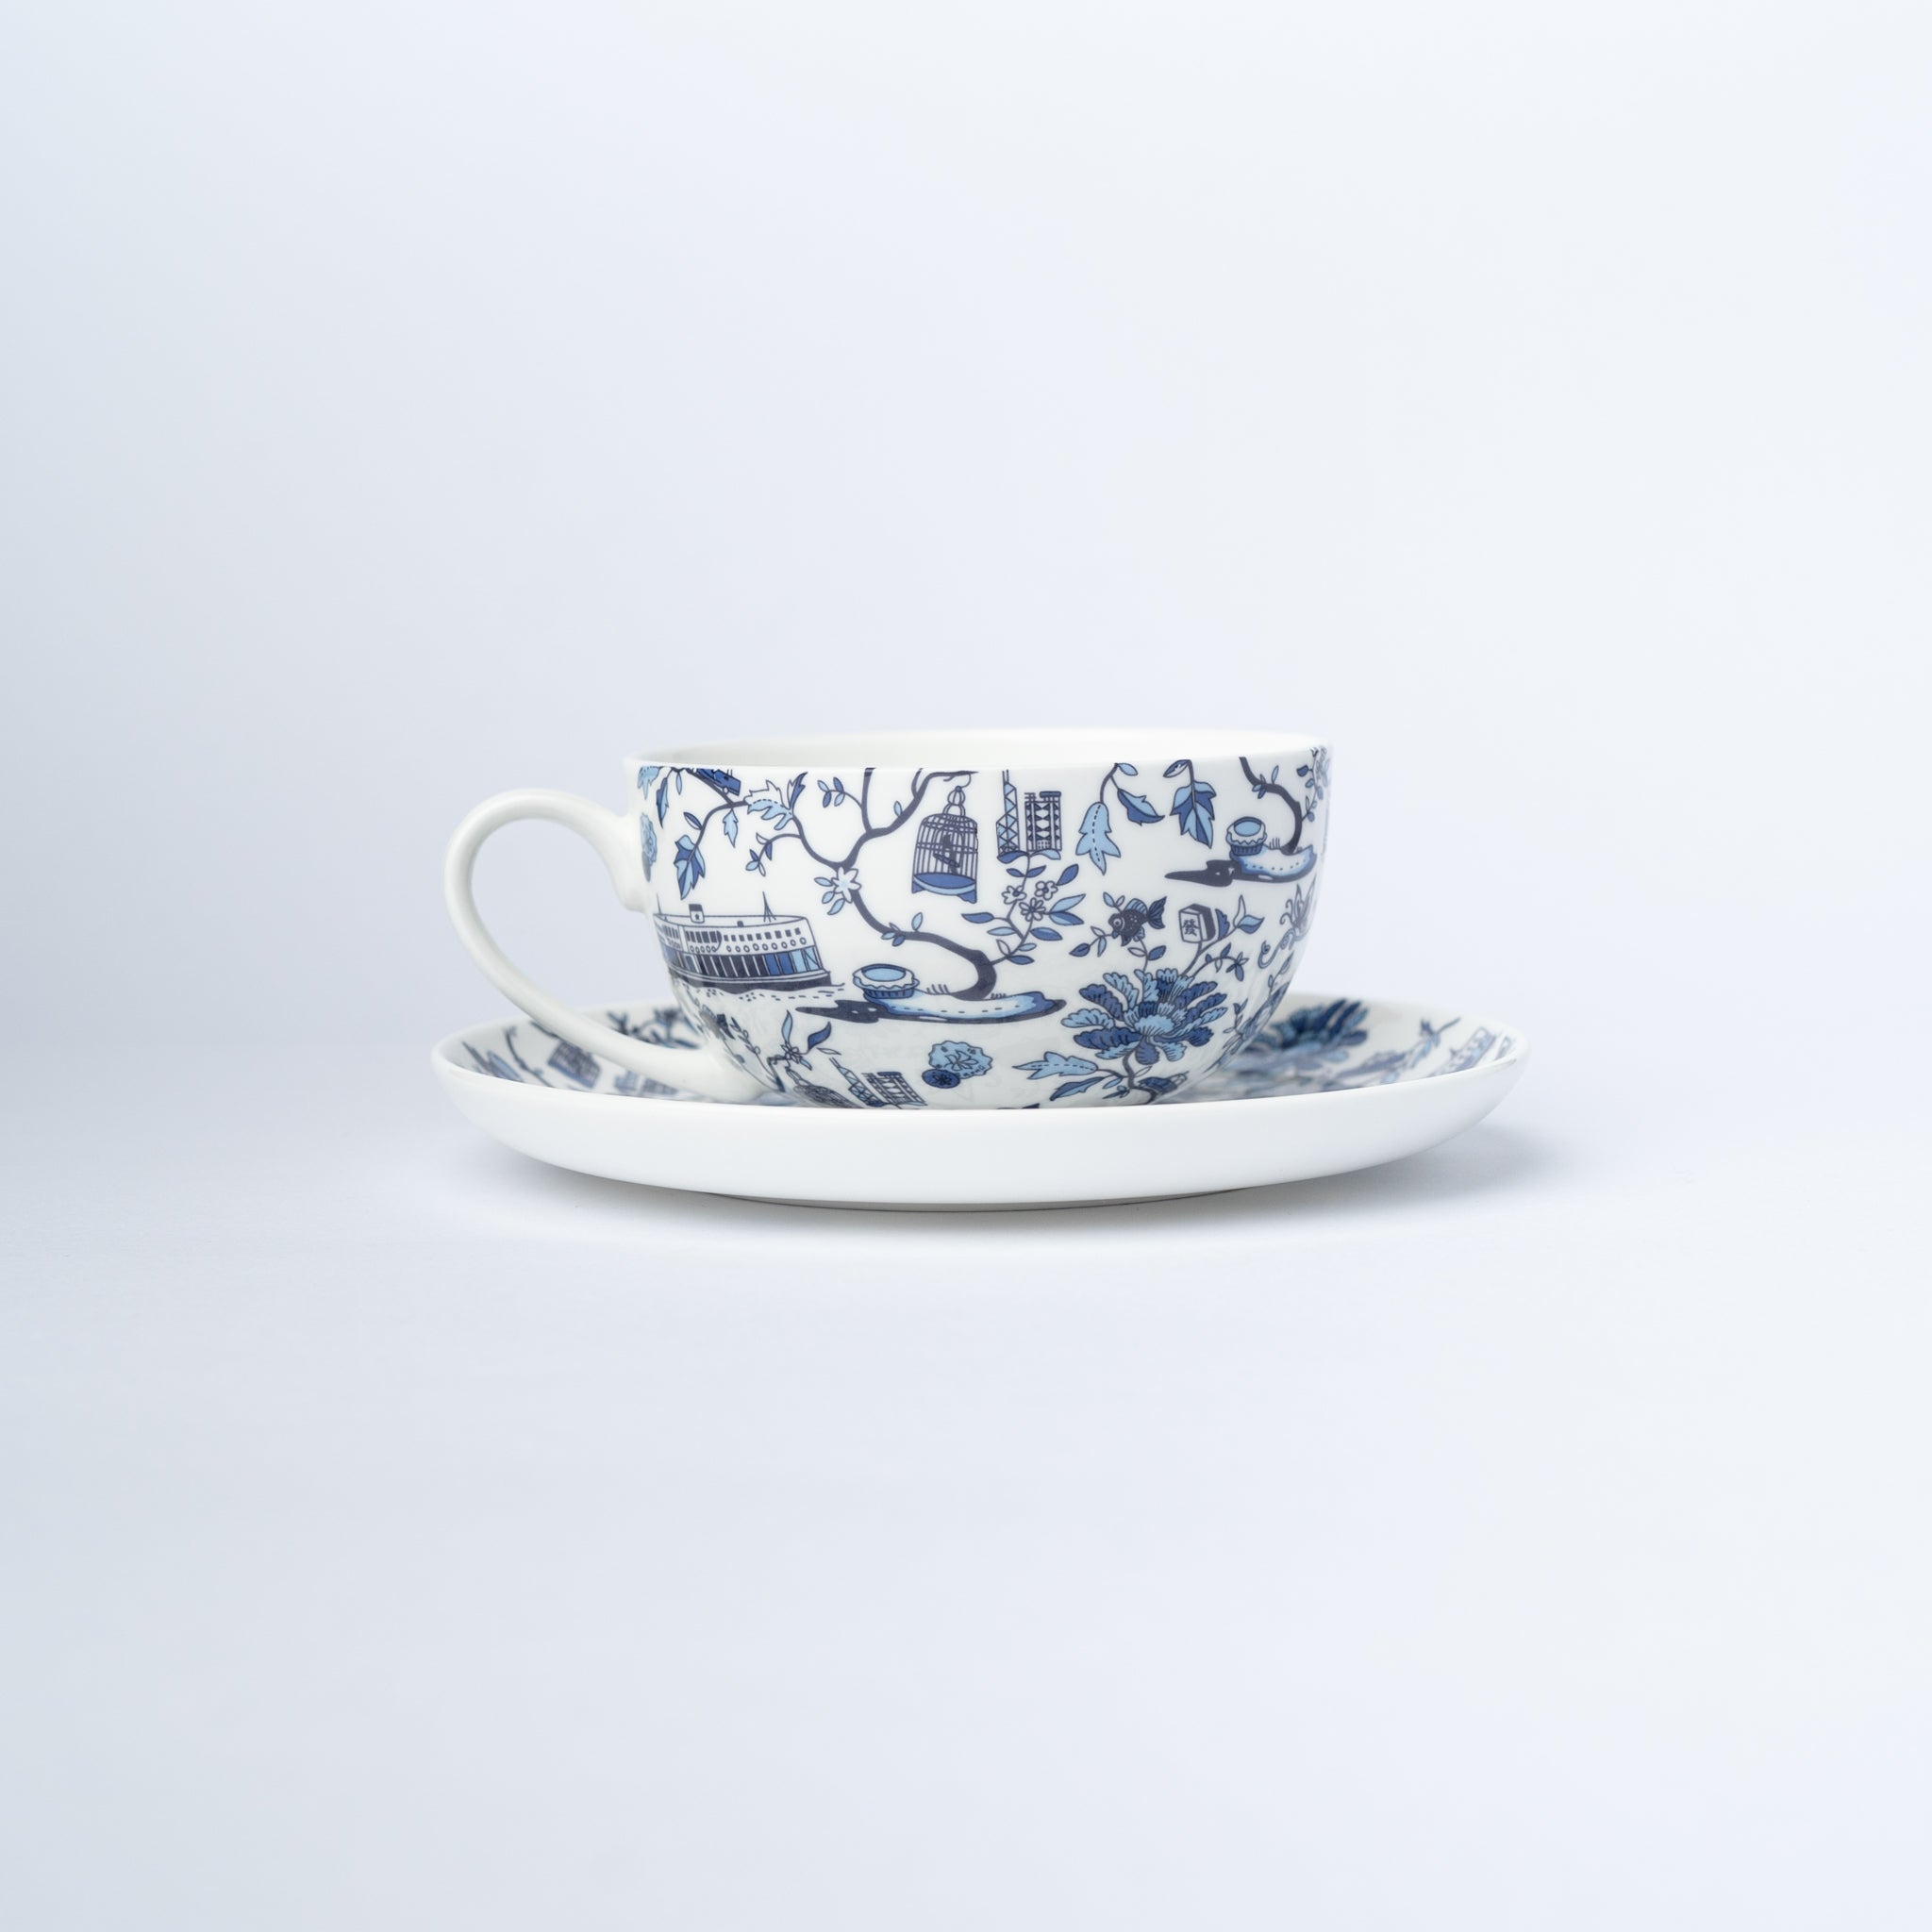 A cup and saucer with a blue and white design of iconic Hong Kong imagery.